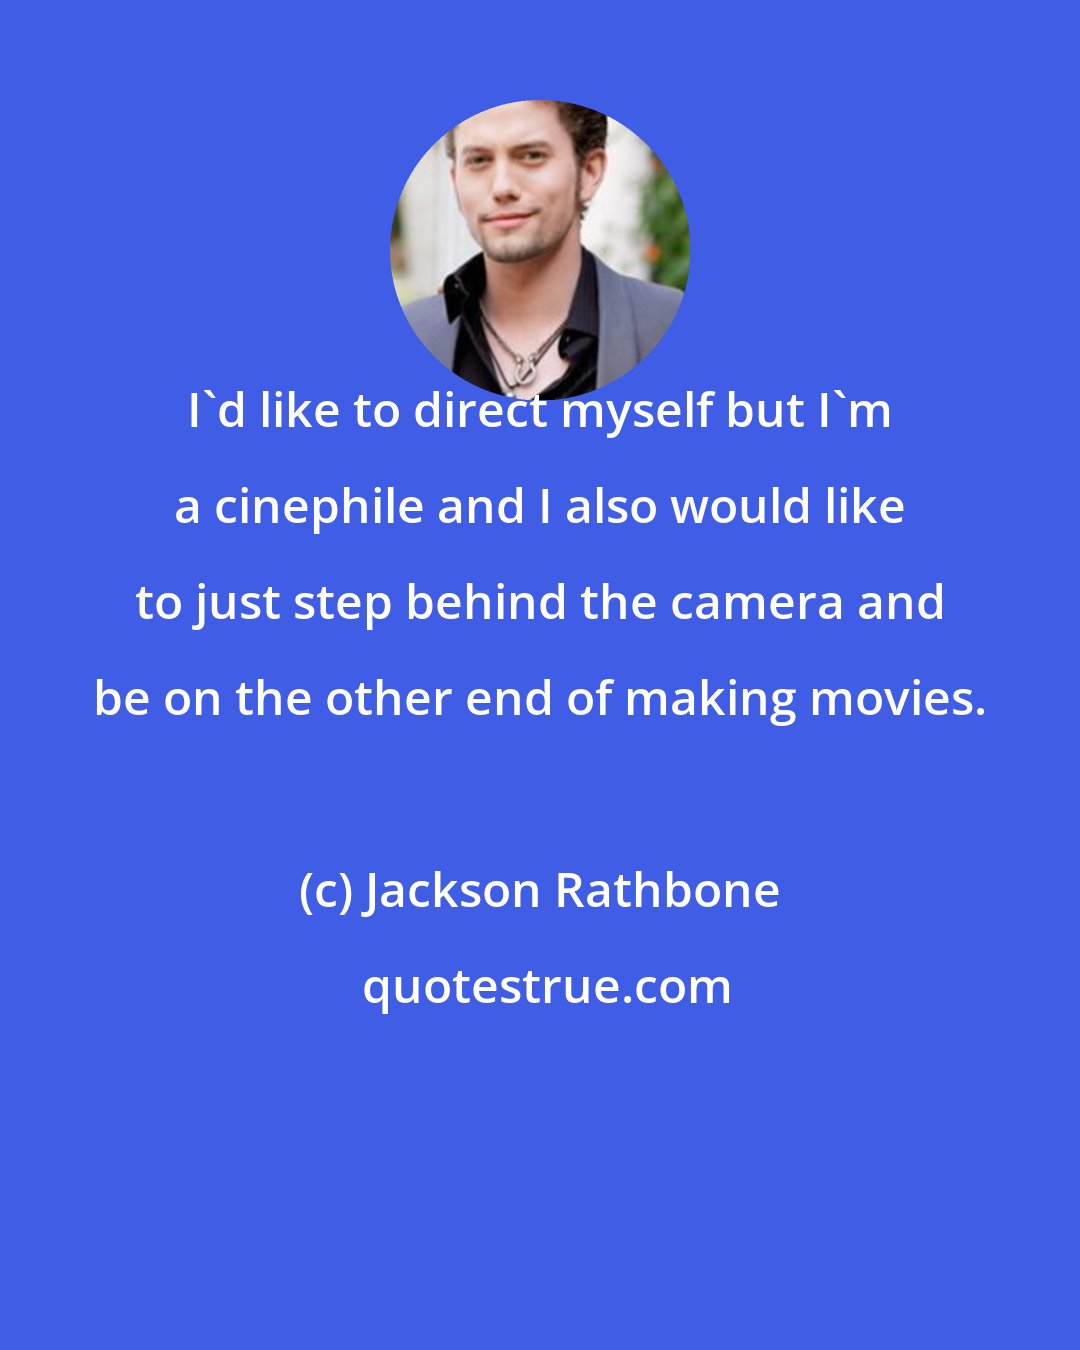 Jackson Rathbone: I'd like to direct myself but I'm a cinephile and I also would like to just step behind the camera and be on the other end of making movies.